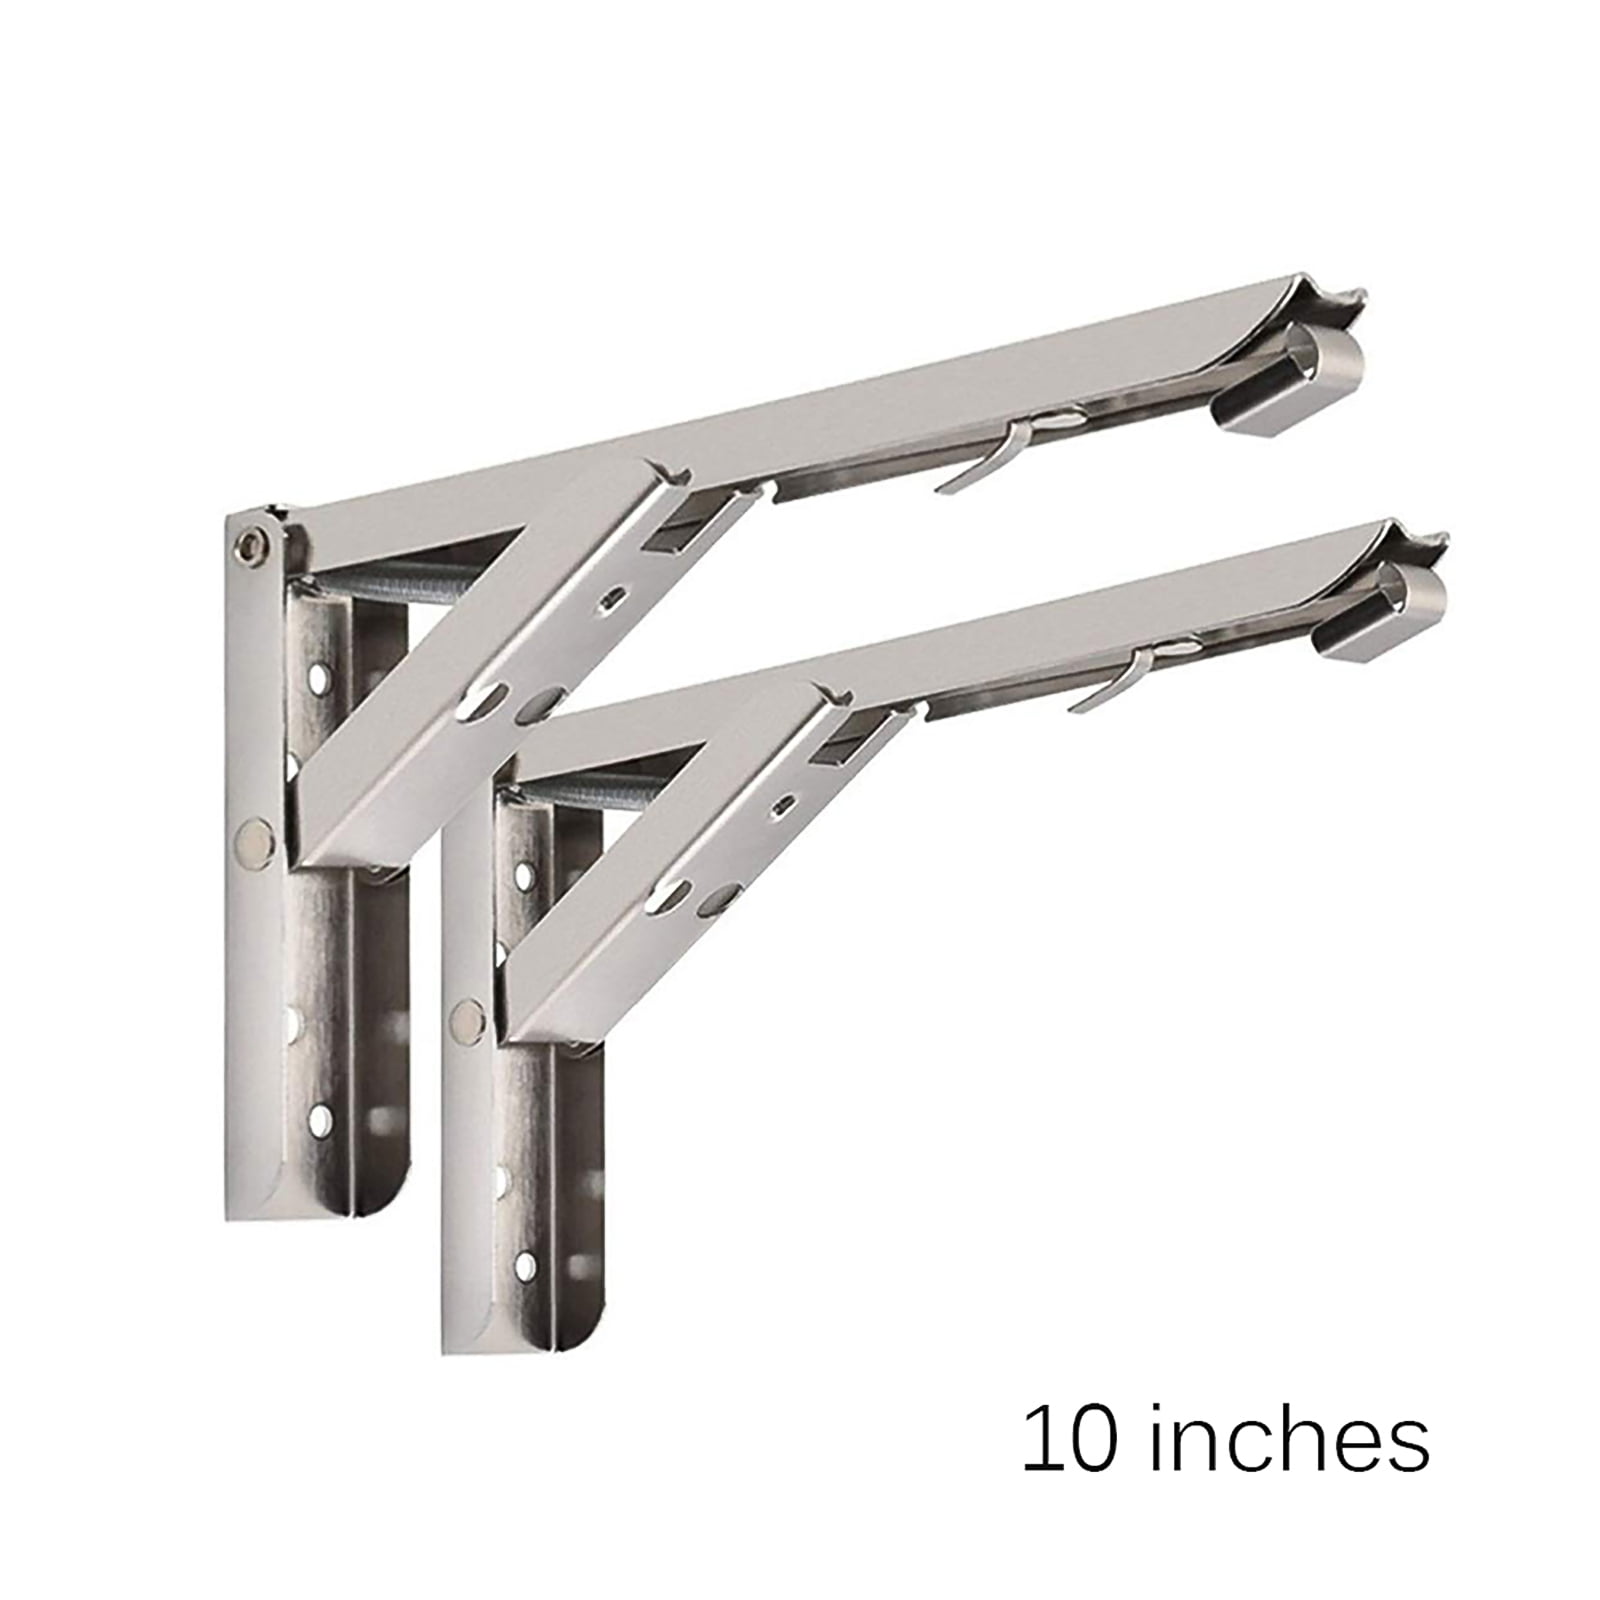 Dido Pair 8inch Folding Shelf Brackets Heavy Duty Stainless Steel  Collapsible Bracket Wall Mounted DIY Foldable Brackets for Table Desk  Workbench